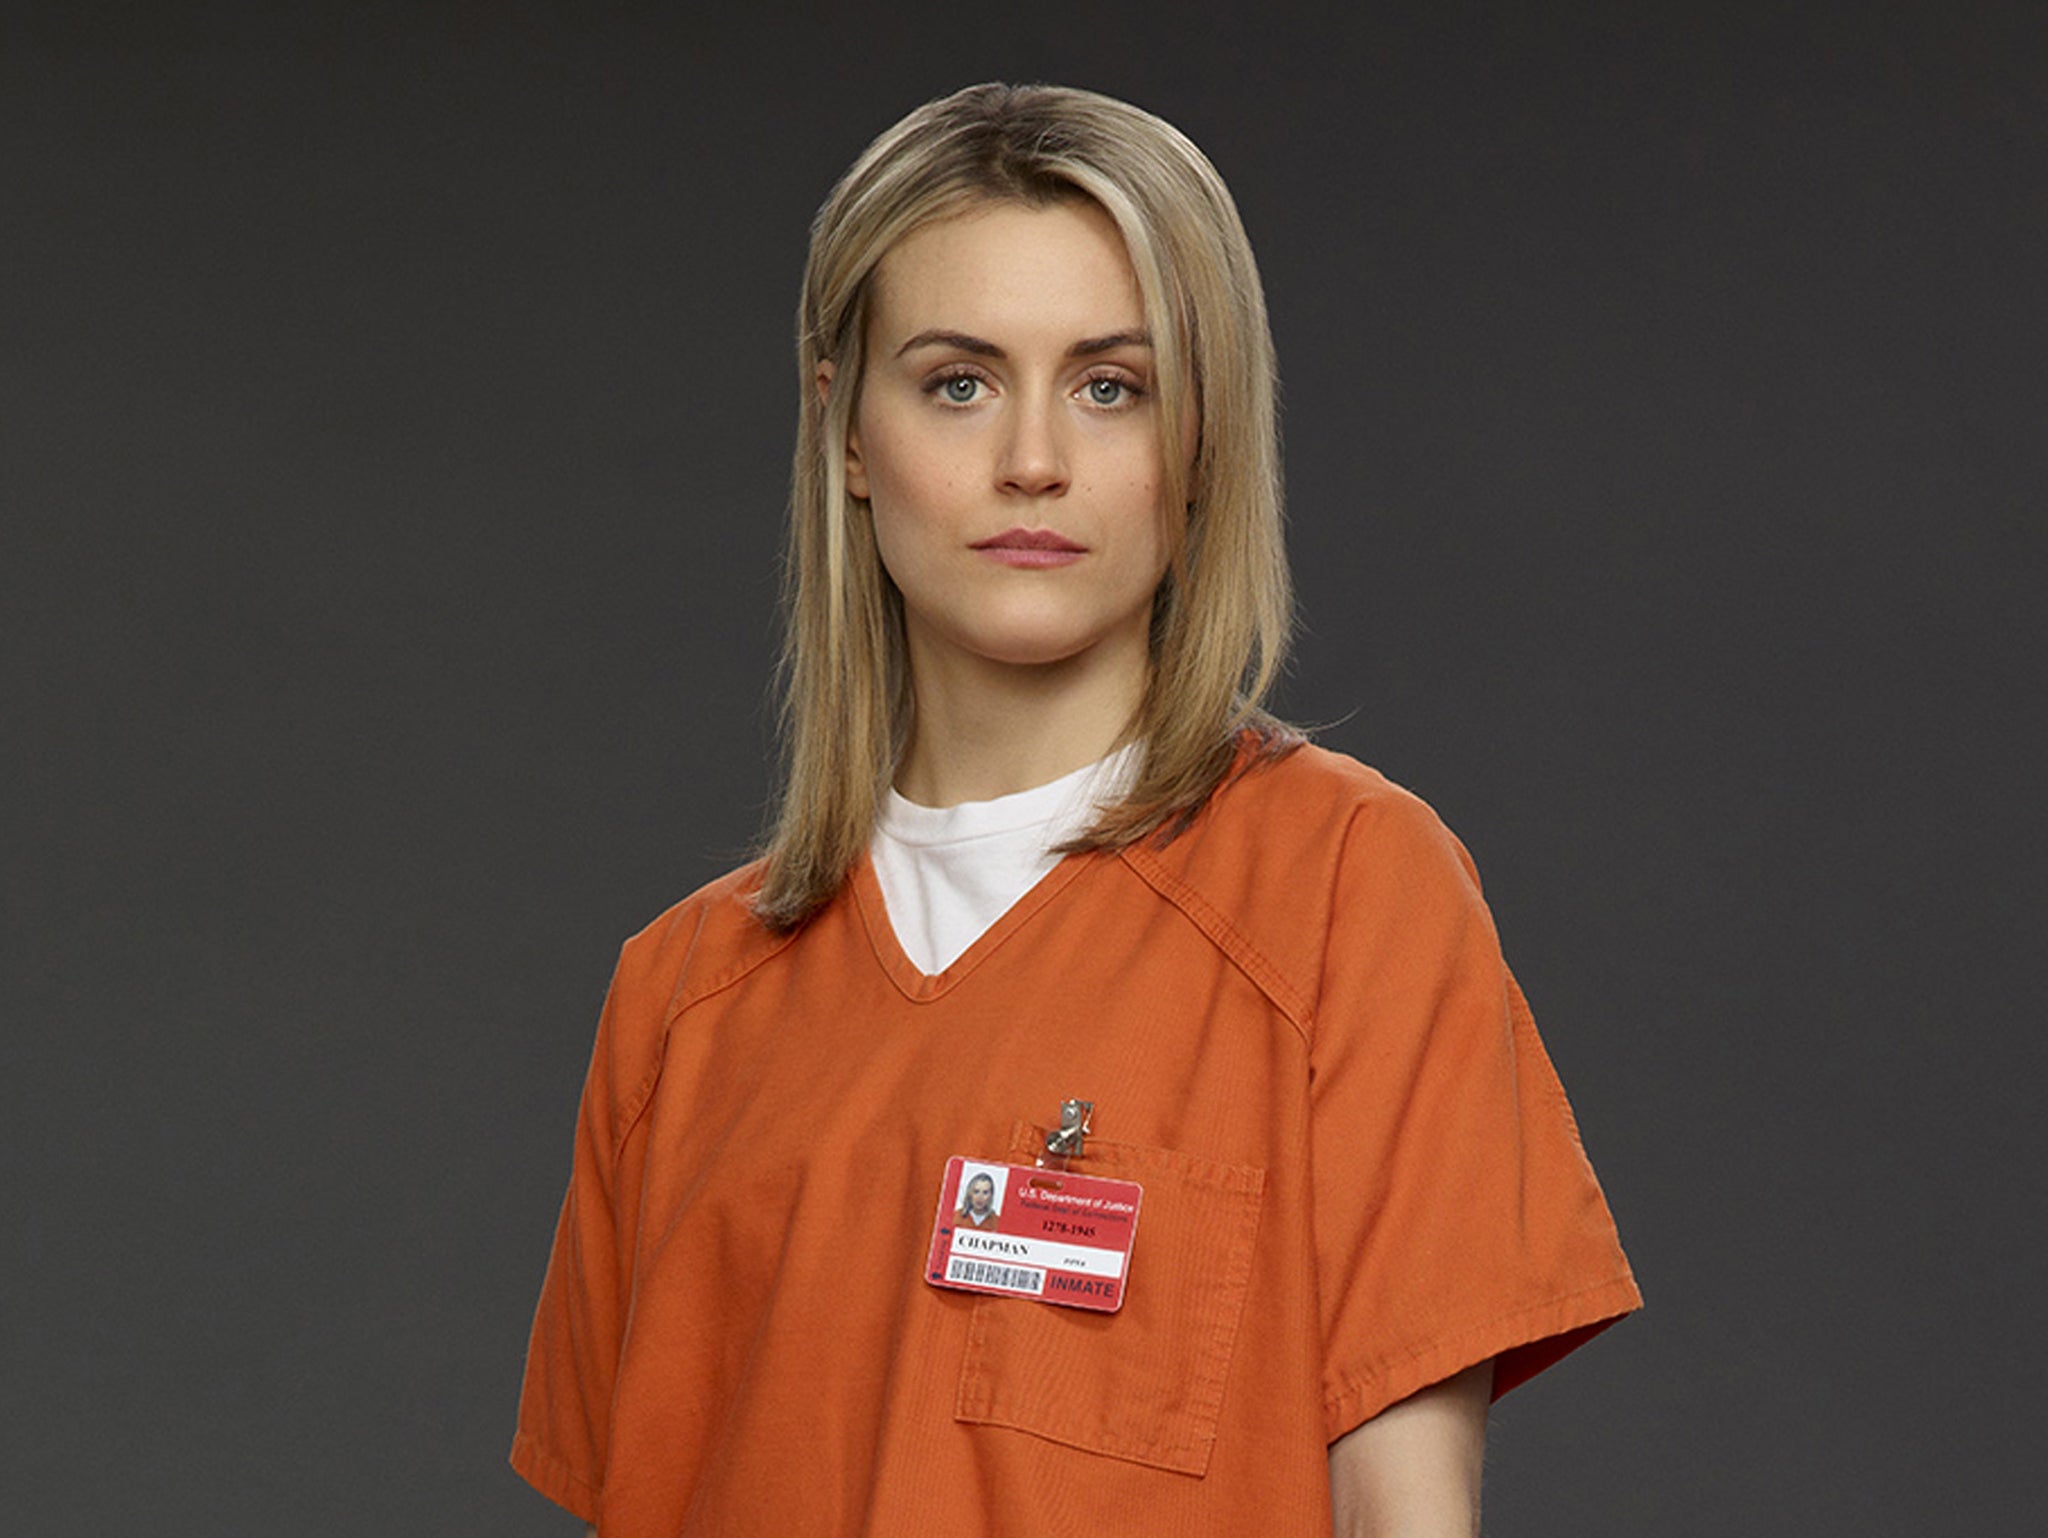 Taylor Schilling as Piper in “Orange is the New Black”